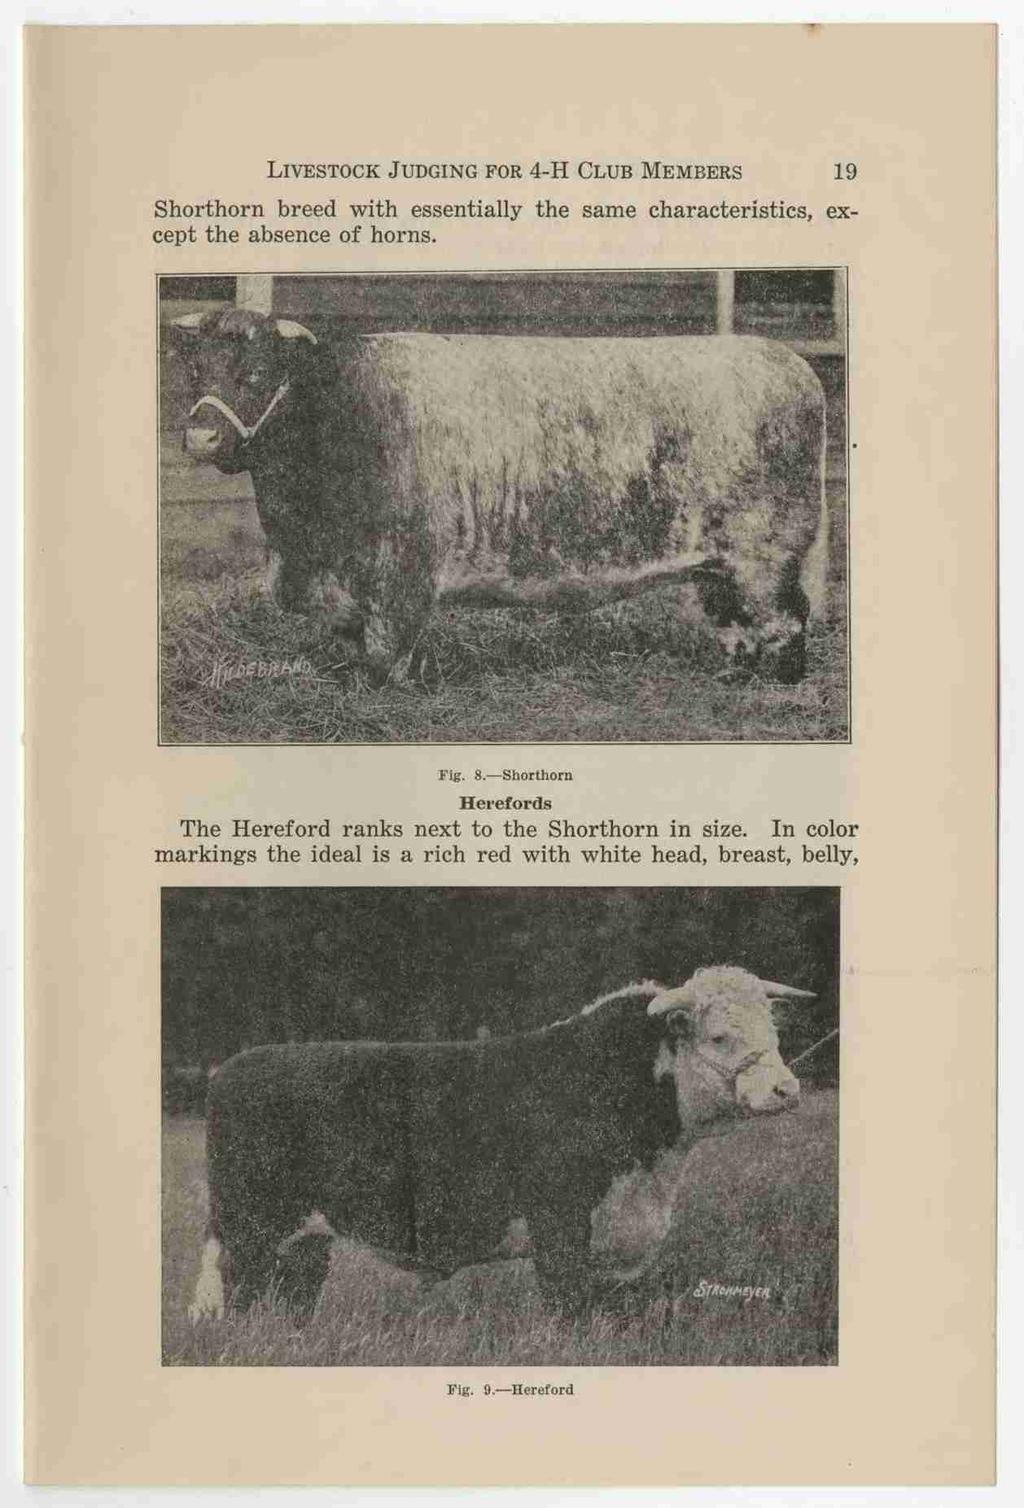 LIVESTOCK J UDGING FOR 4-H CLUB MEMBERS 19 Shorthorn breed with essentially the same characteristics, except the absence of horns. Fig. 8.